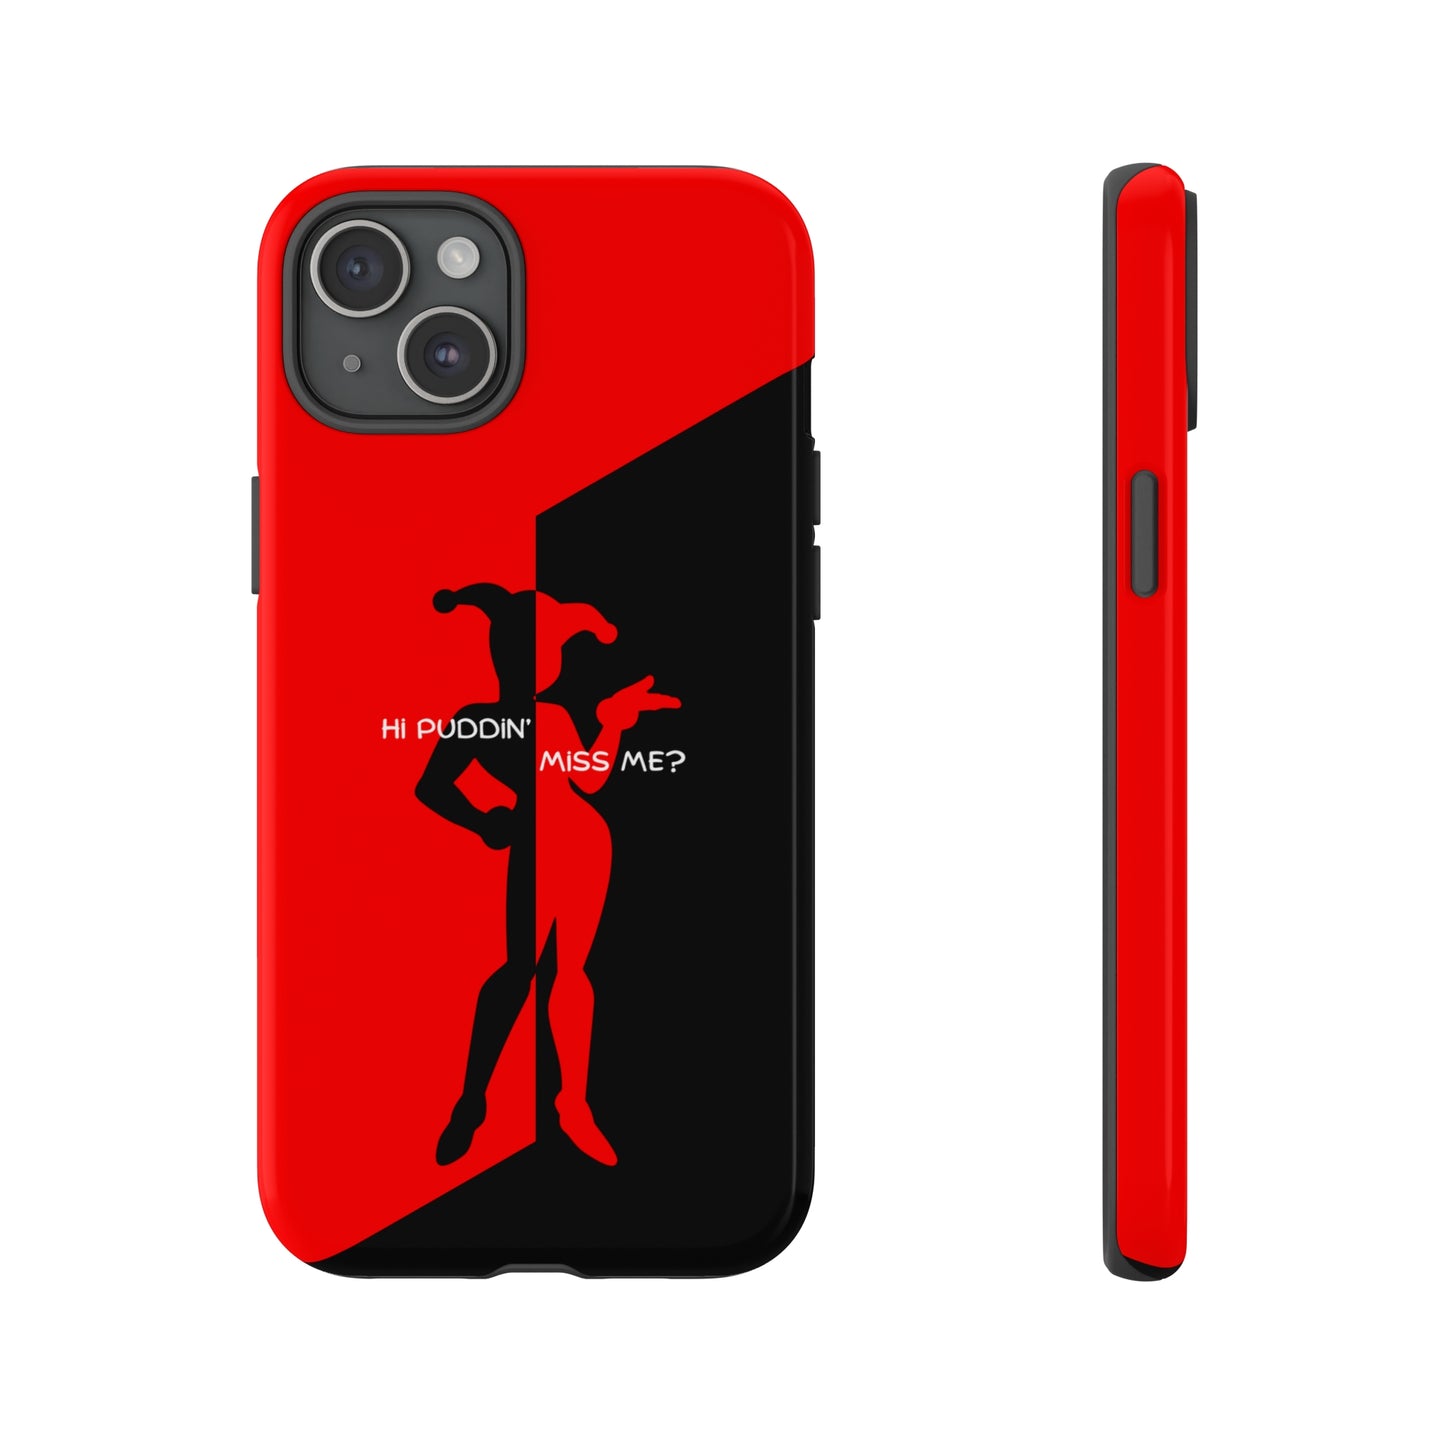 Hi Puddin' Miss Me? - Cell Phone Case